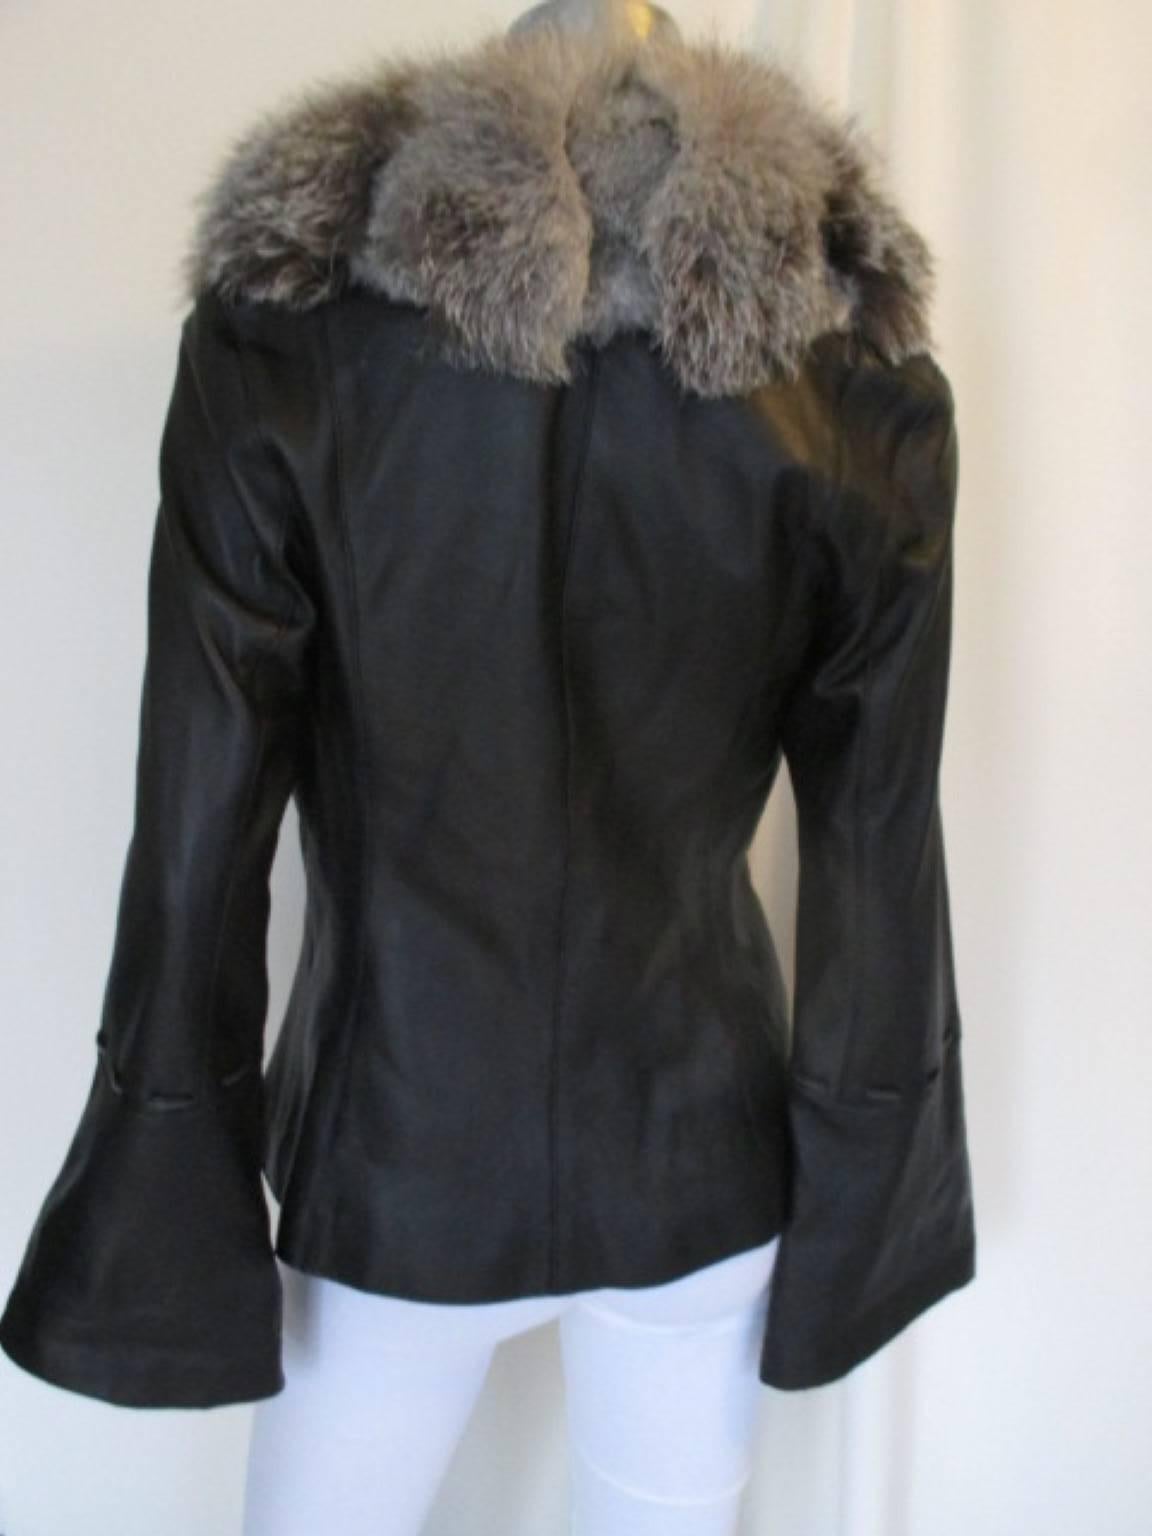 black leather jacket with fur